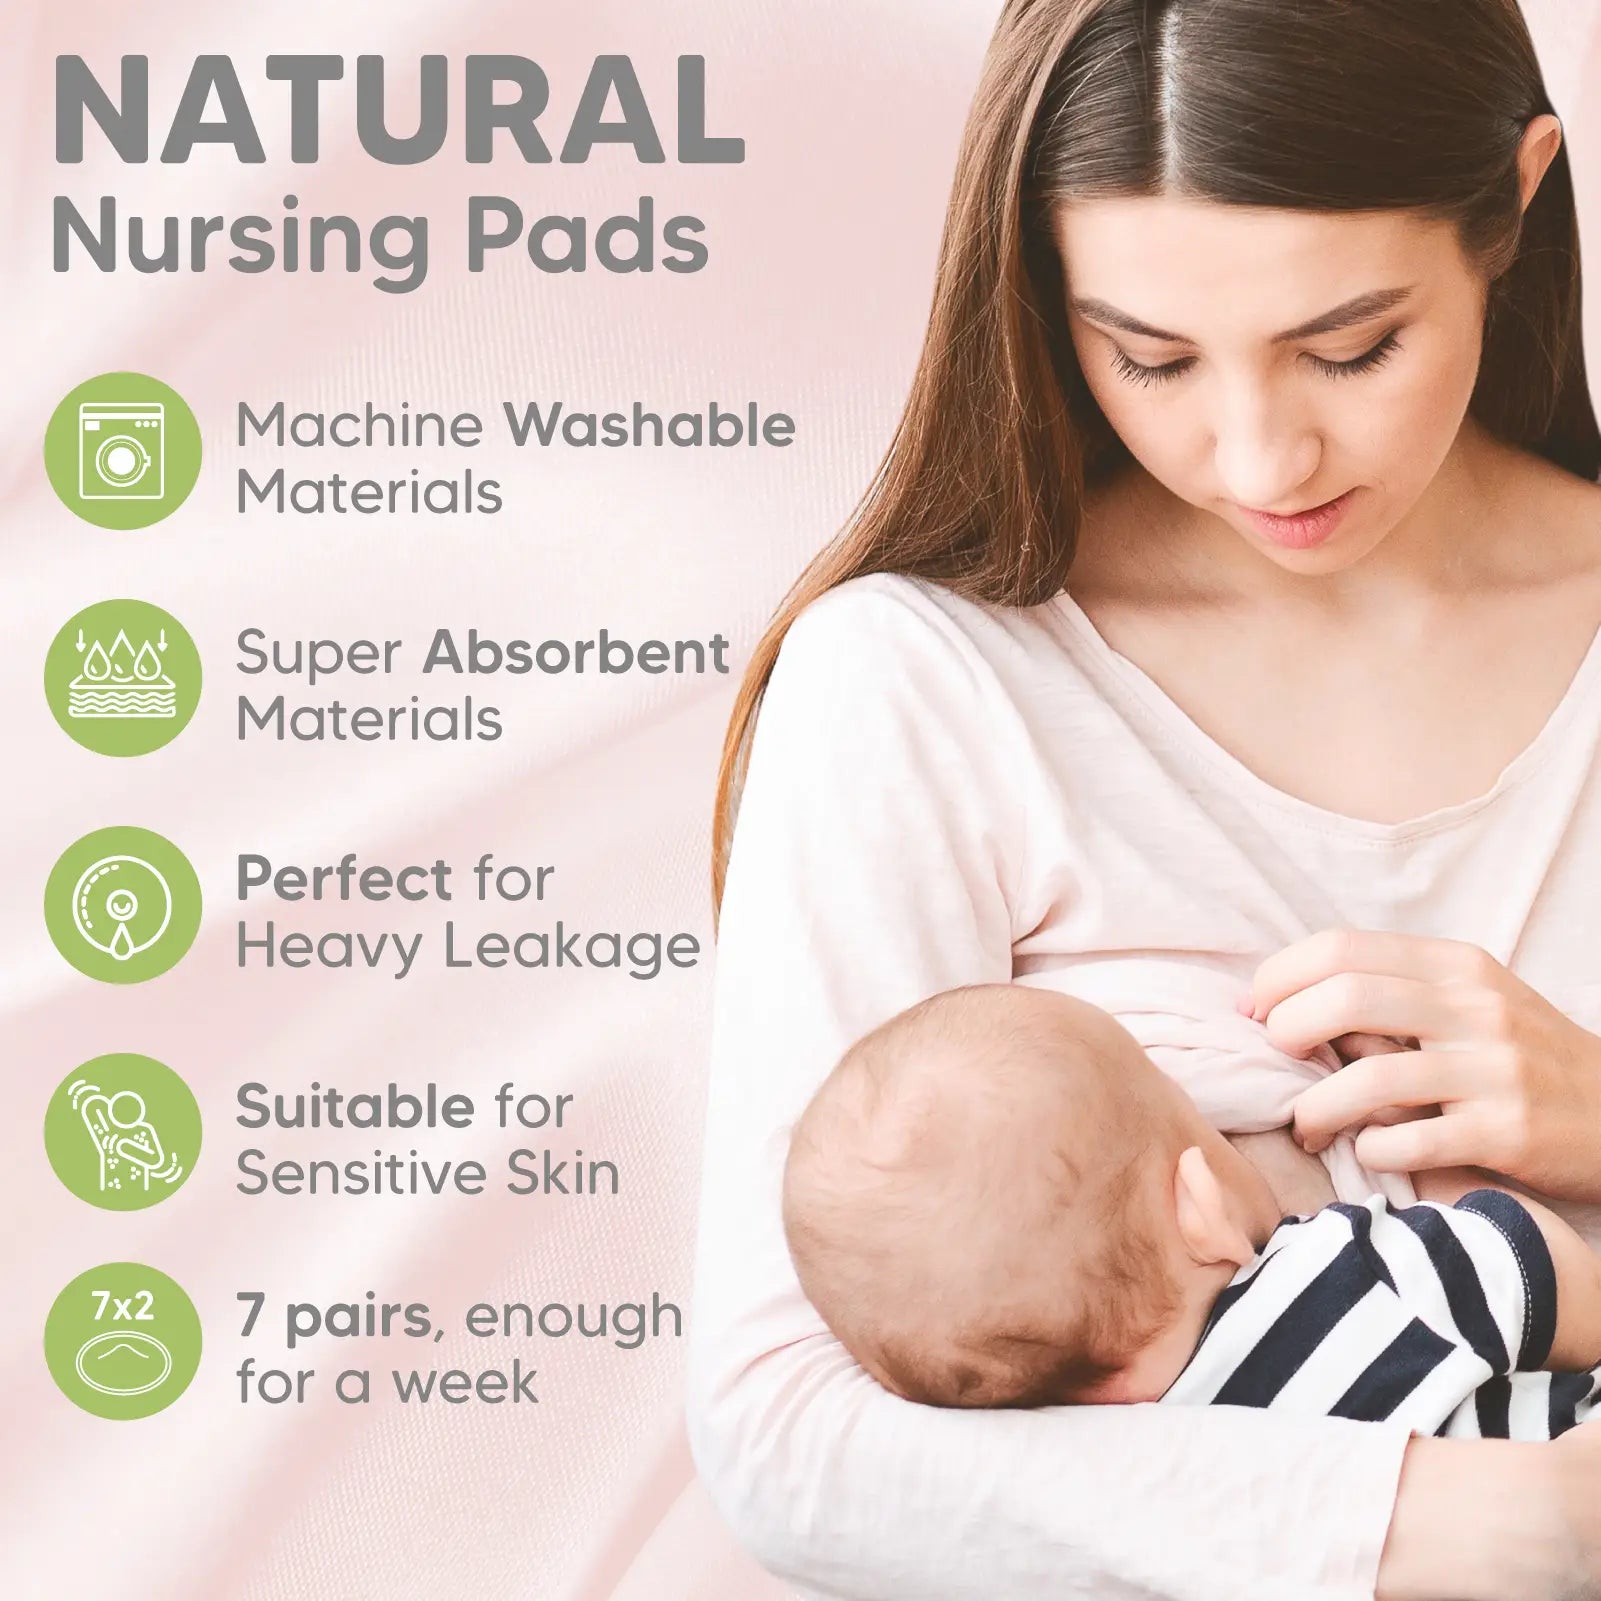 Reusable Nursing Pads for Breastfeeding, 14-Pack - 4-Layers